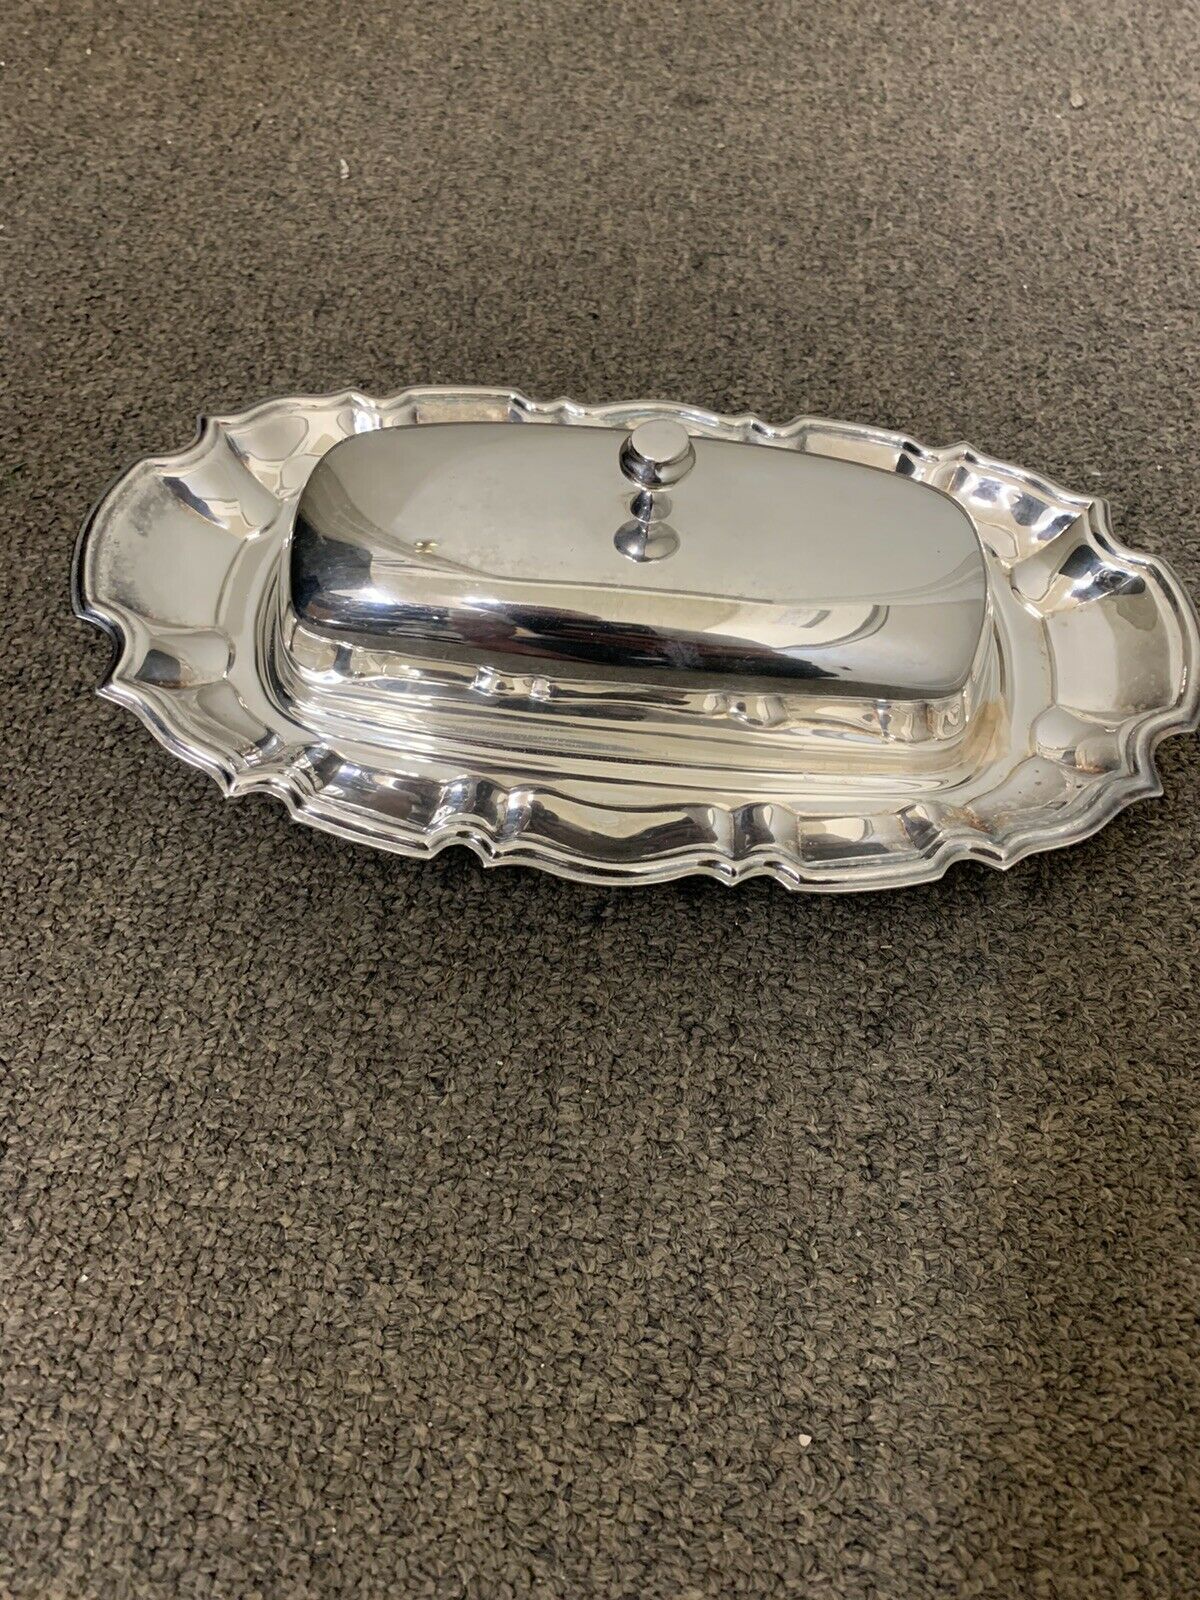 Towle Silver Plate Butter Dish Insert In The Wrapper Still Excellent Condition